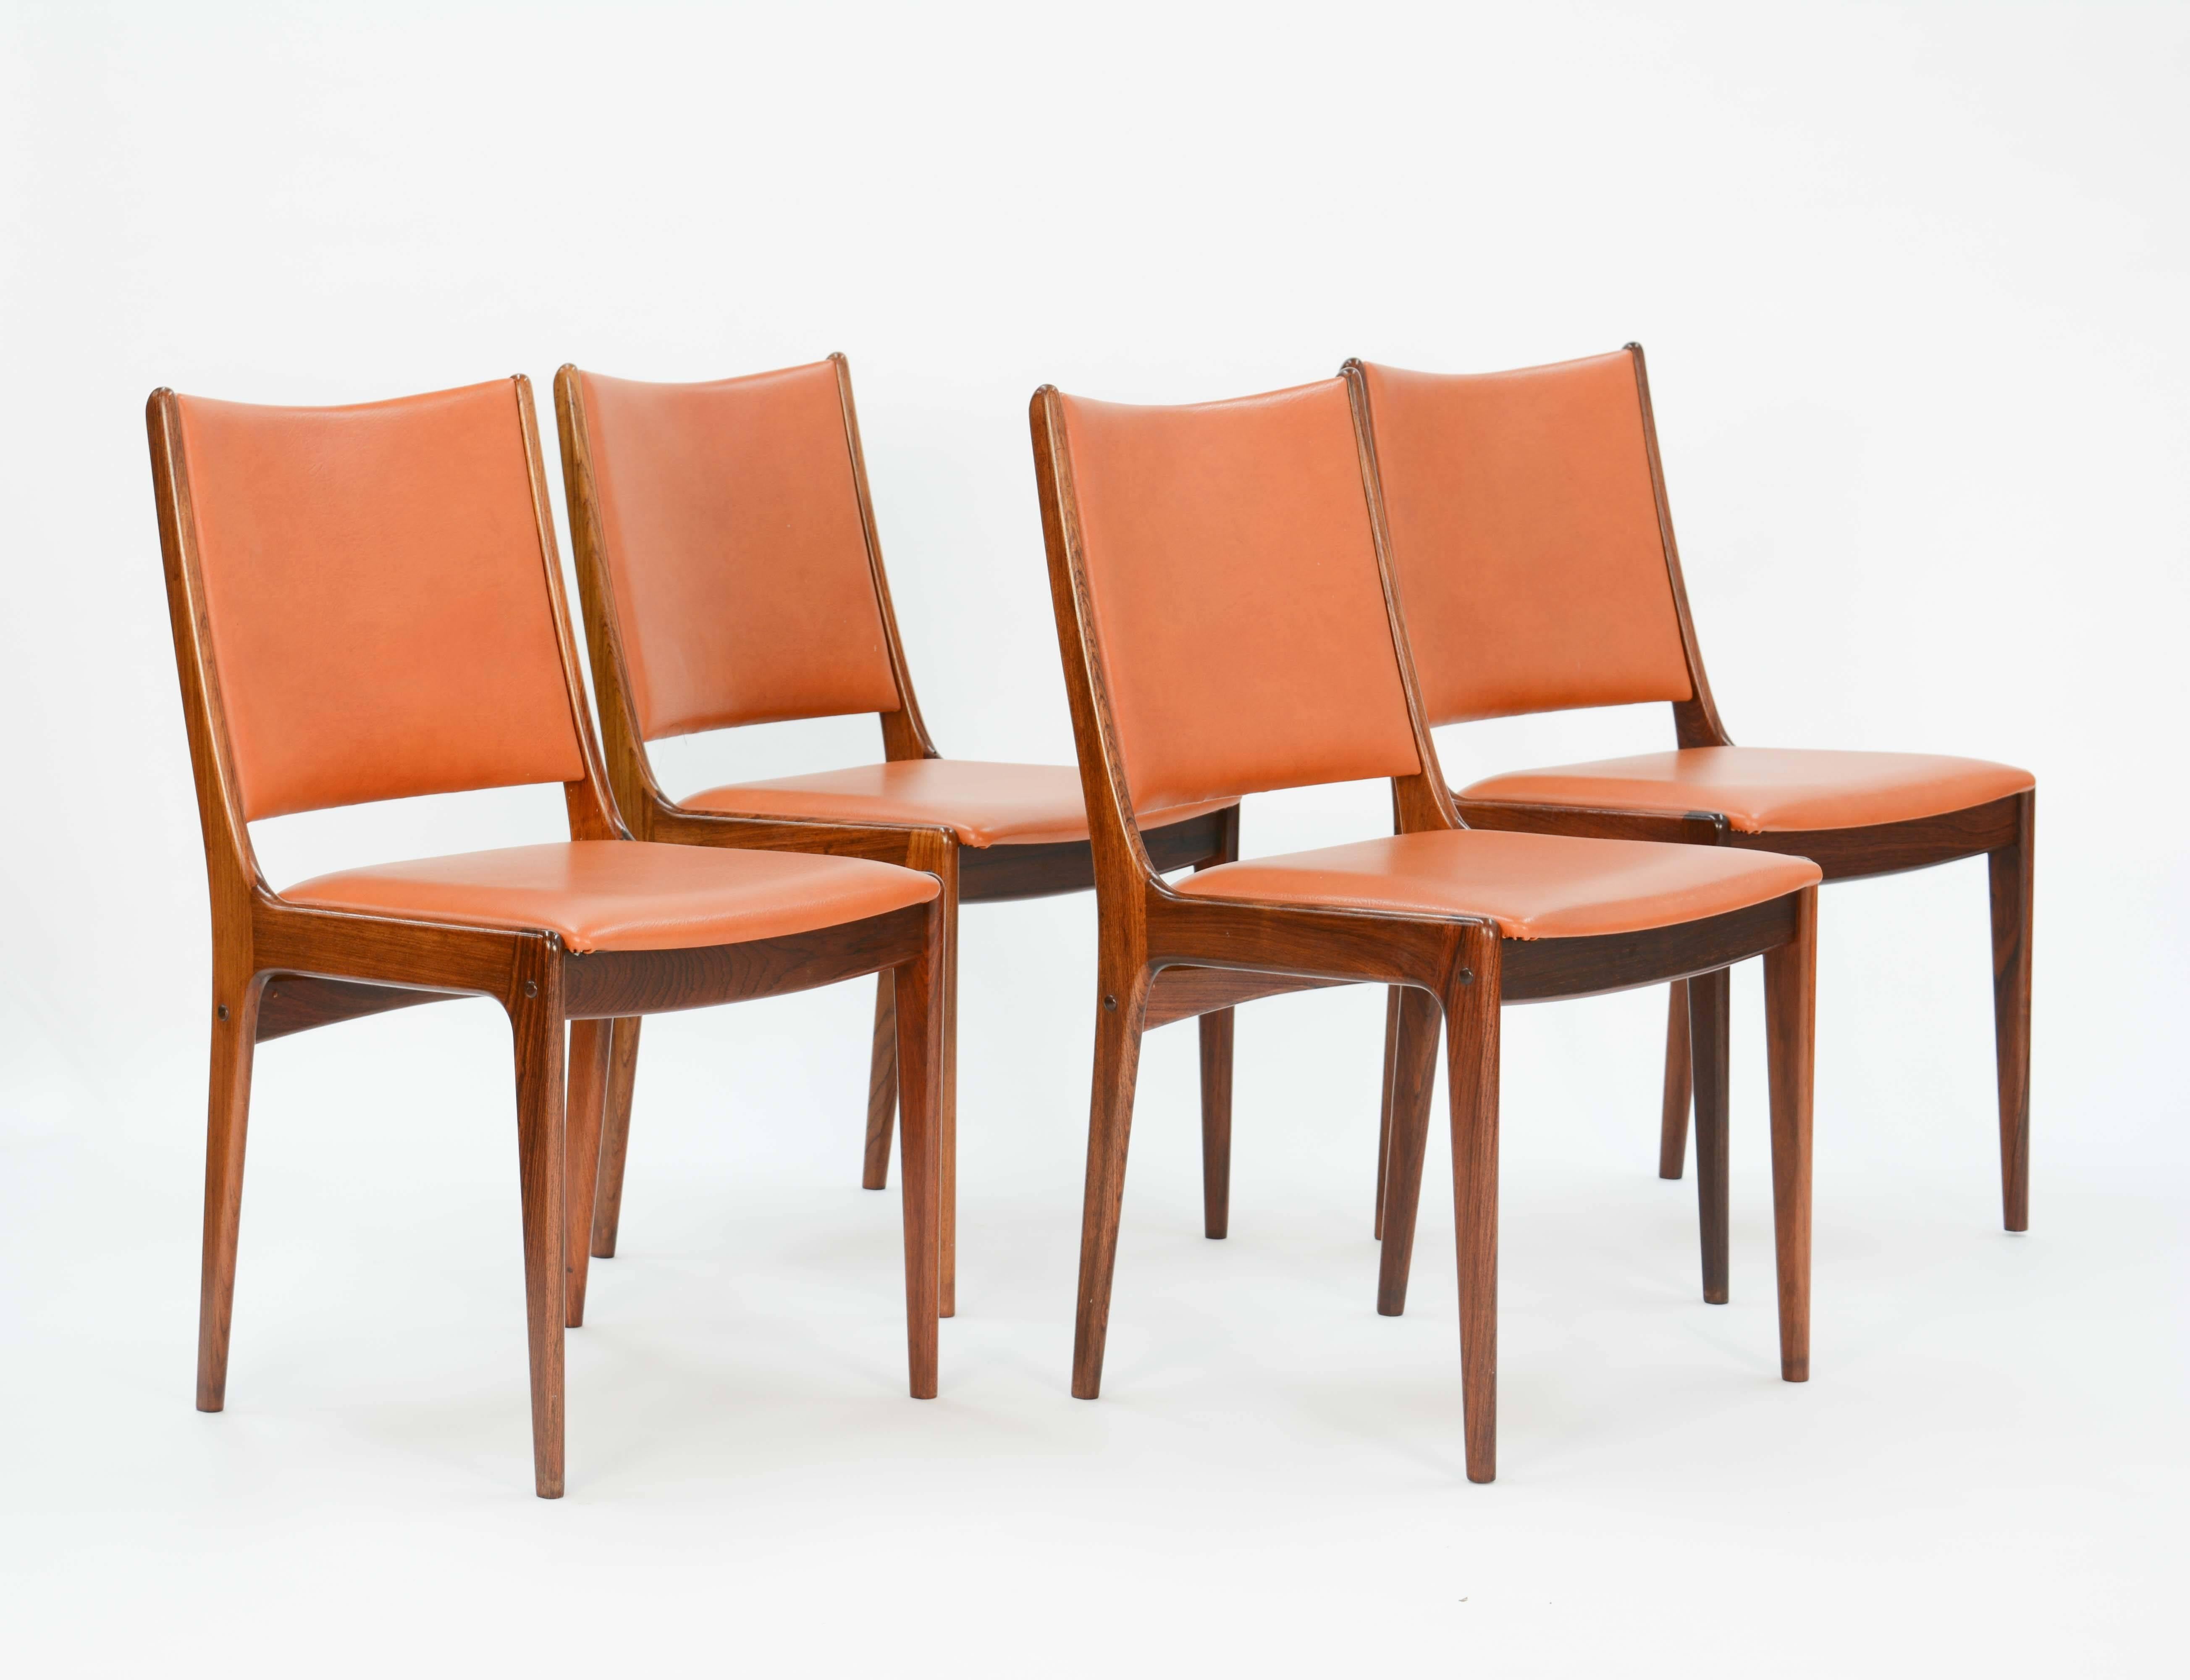 Mid-20th Century Set of Four Rosewood Side Chairs by Johannes Andersen for Uldum Møbelfabrik